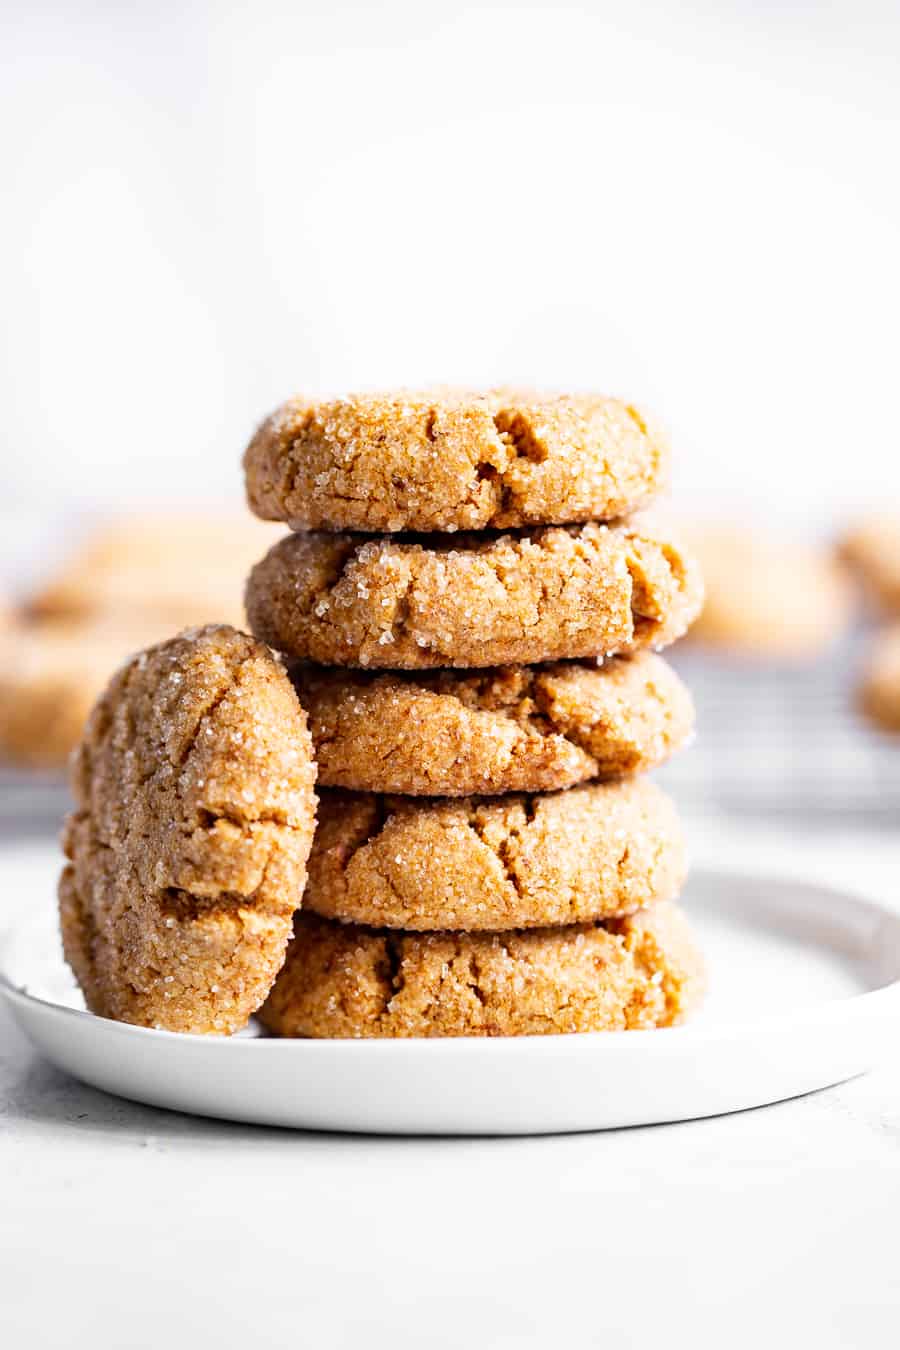 These one bowl peanut butter cookies are make with your favorite creamy nut butter and just a few simple, healthy ingredients!  They’re soft and a little crisp, egg free, vegan, and perfect for simple desserts and snacks, and to make with kids!  Use almond or cashew butter to keep them paleo or peanut butter if you prefer! #paleo #vegan #glutenfree